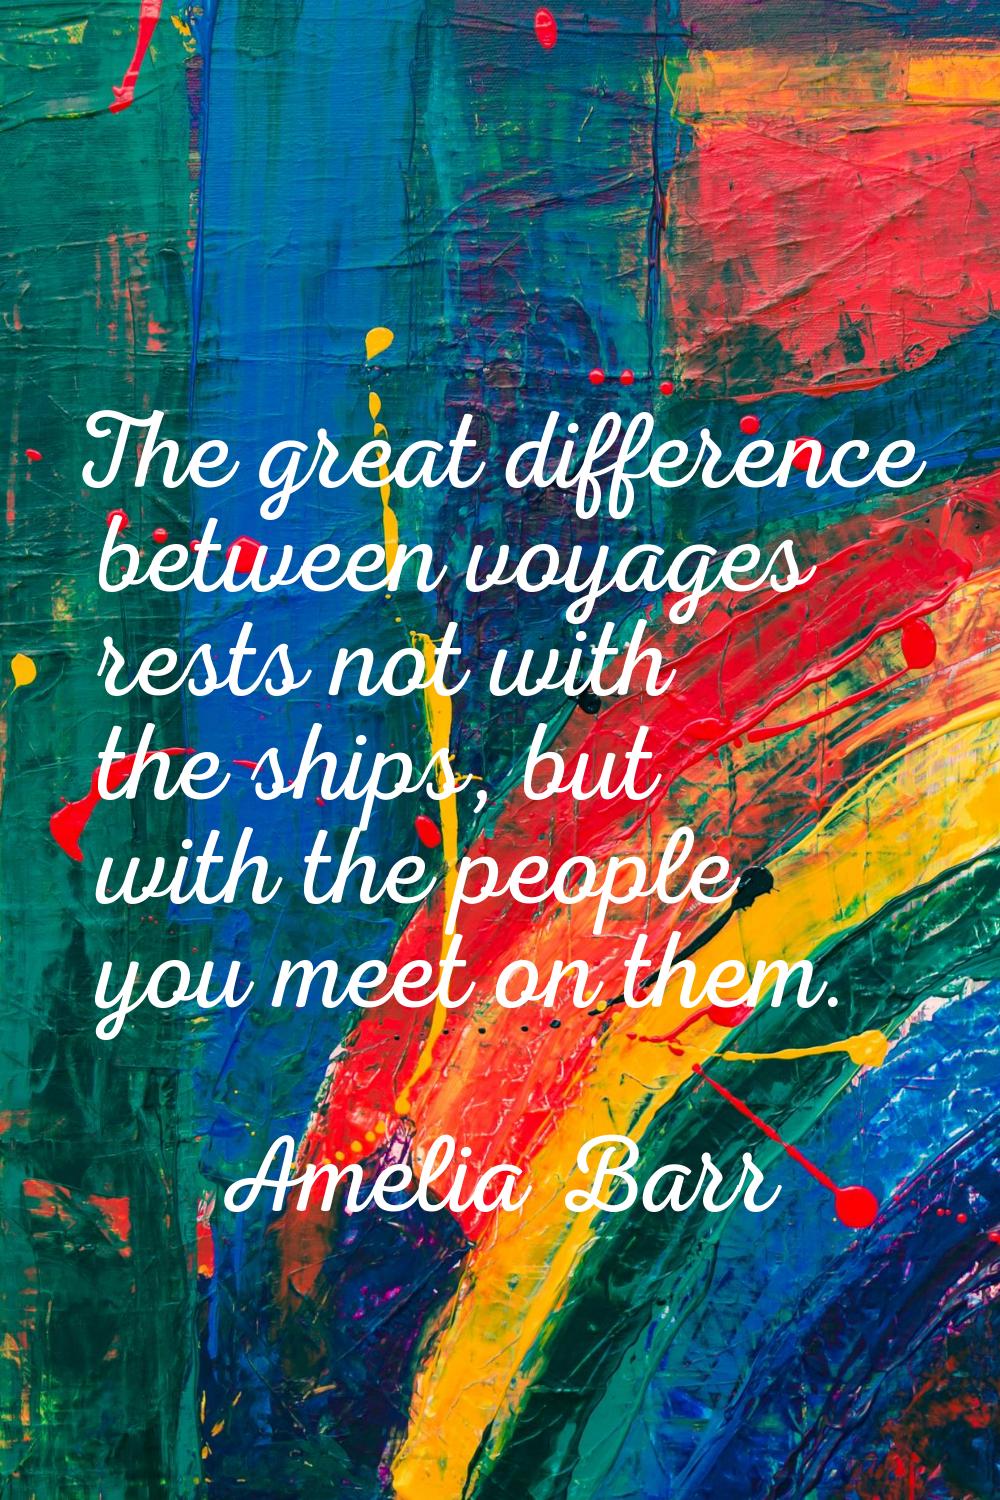 The great difference between voyages rests not with the ships, but with the people you meet on them